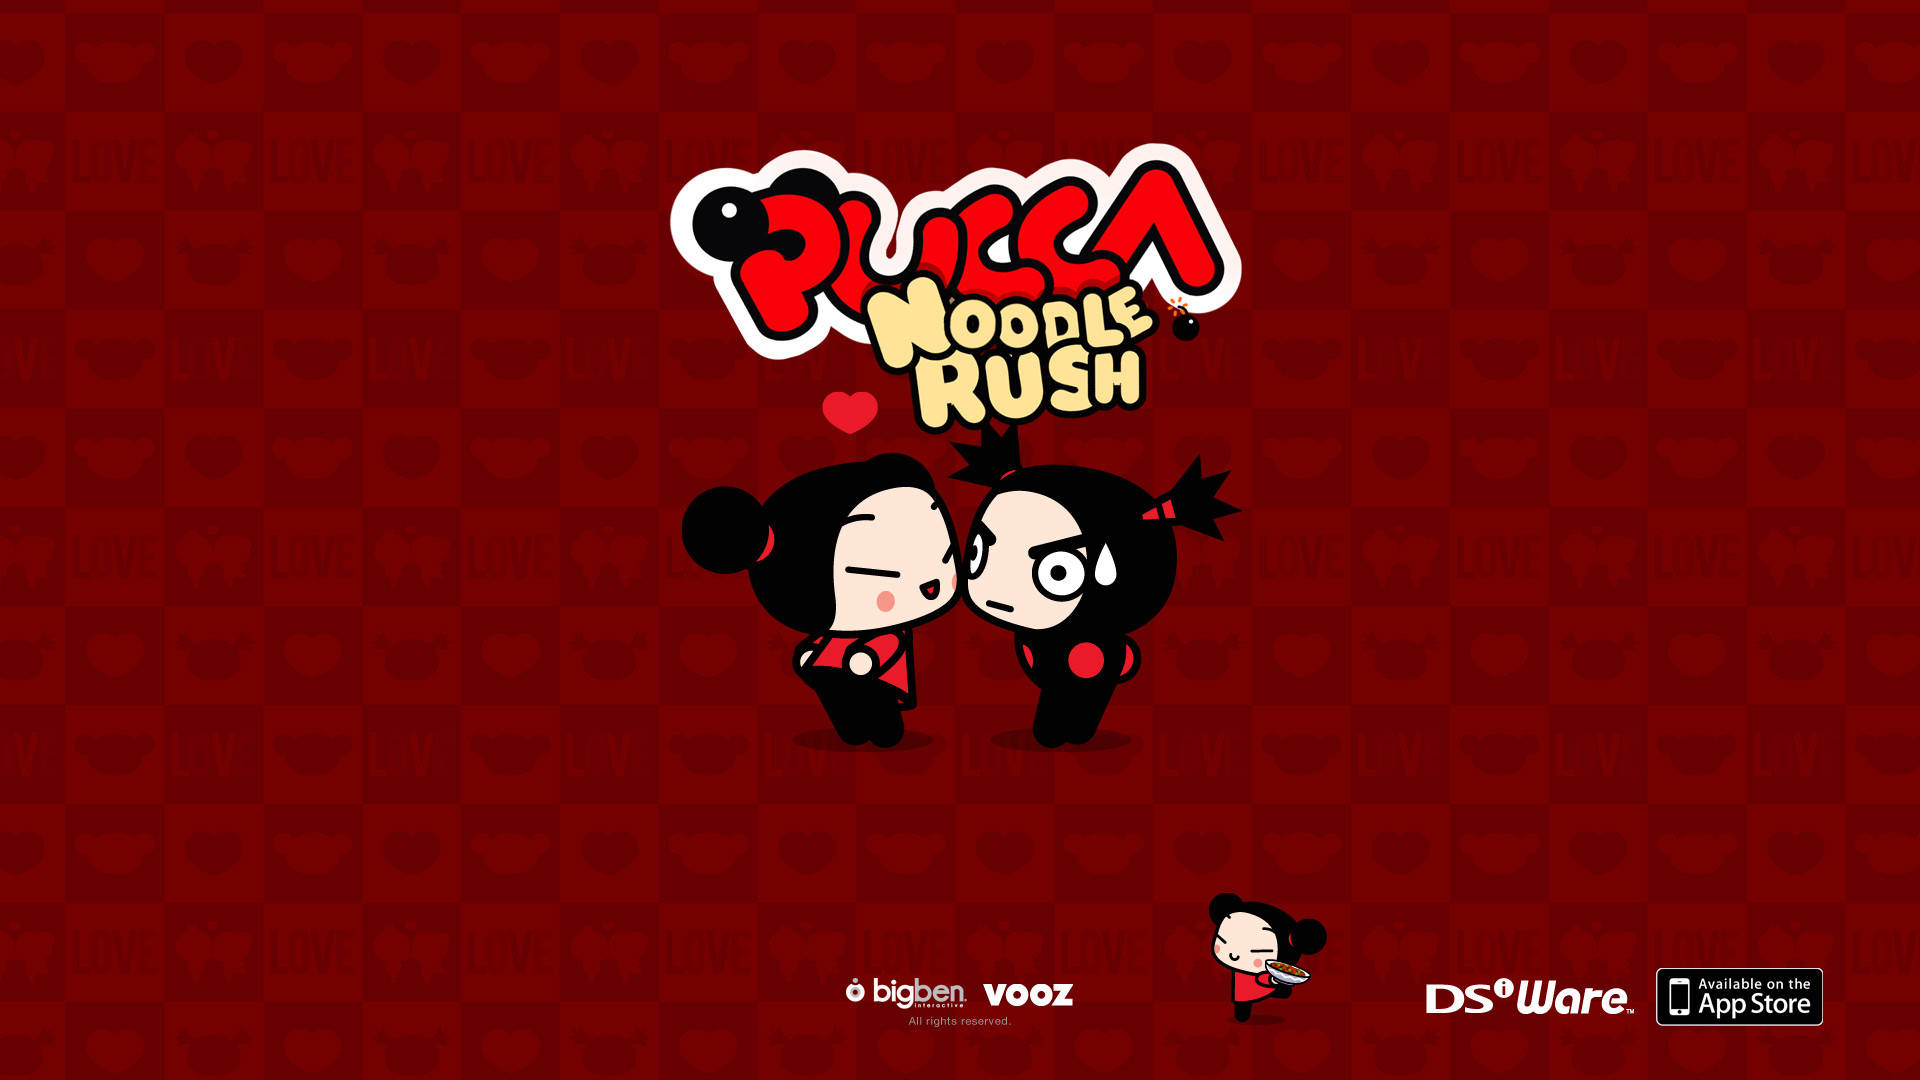 Pucca Noodle Rush Promotional Poster